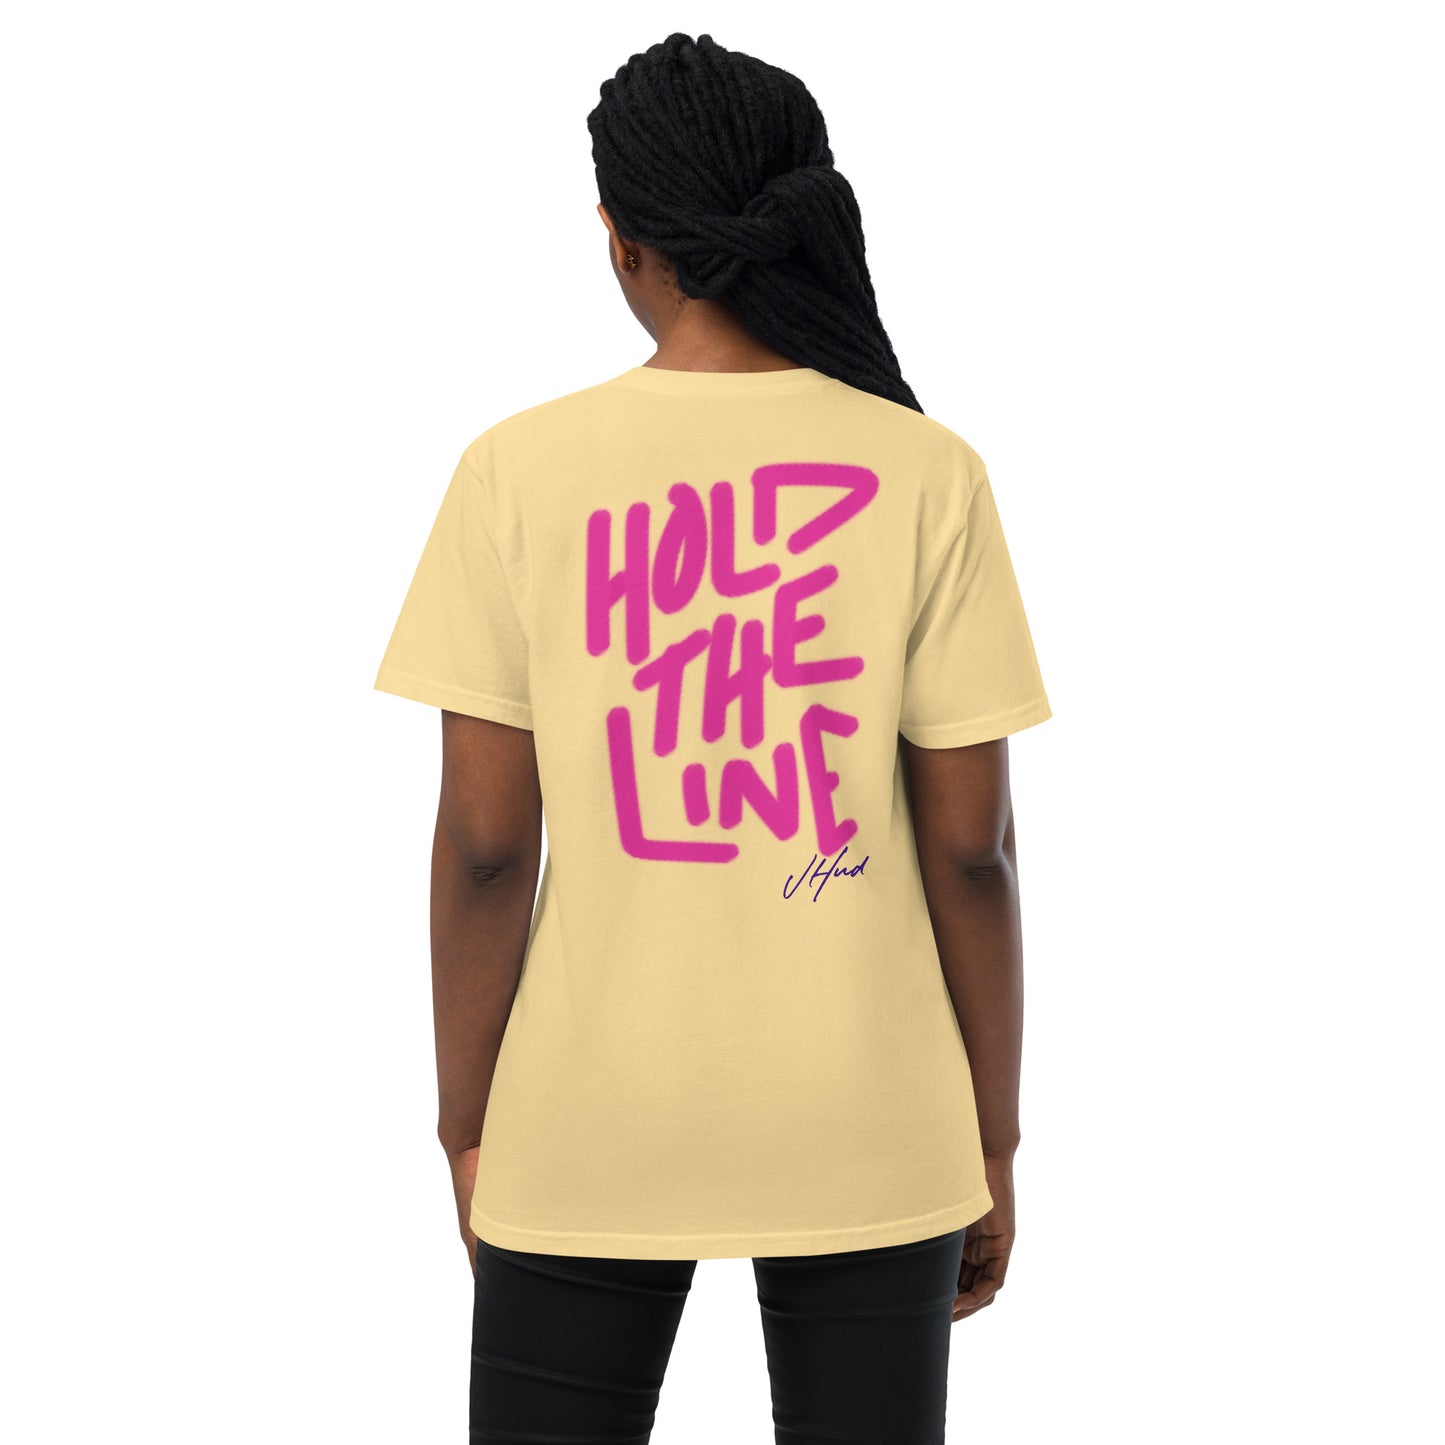 Hold the Line Heavyweight Pocket T-Shirt - White